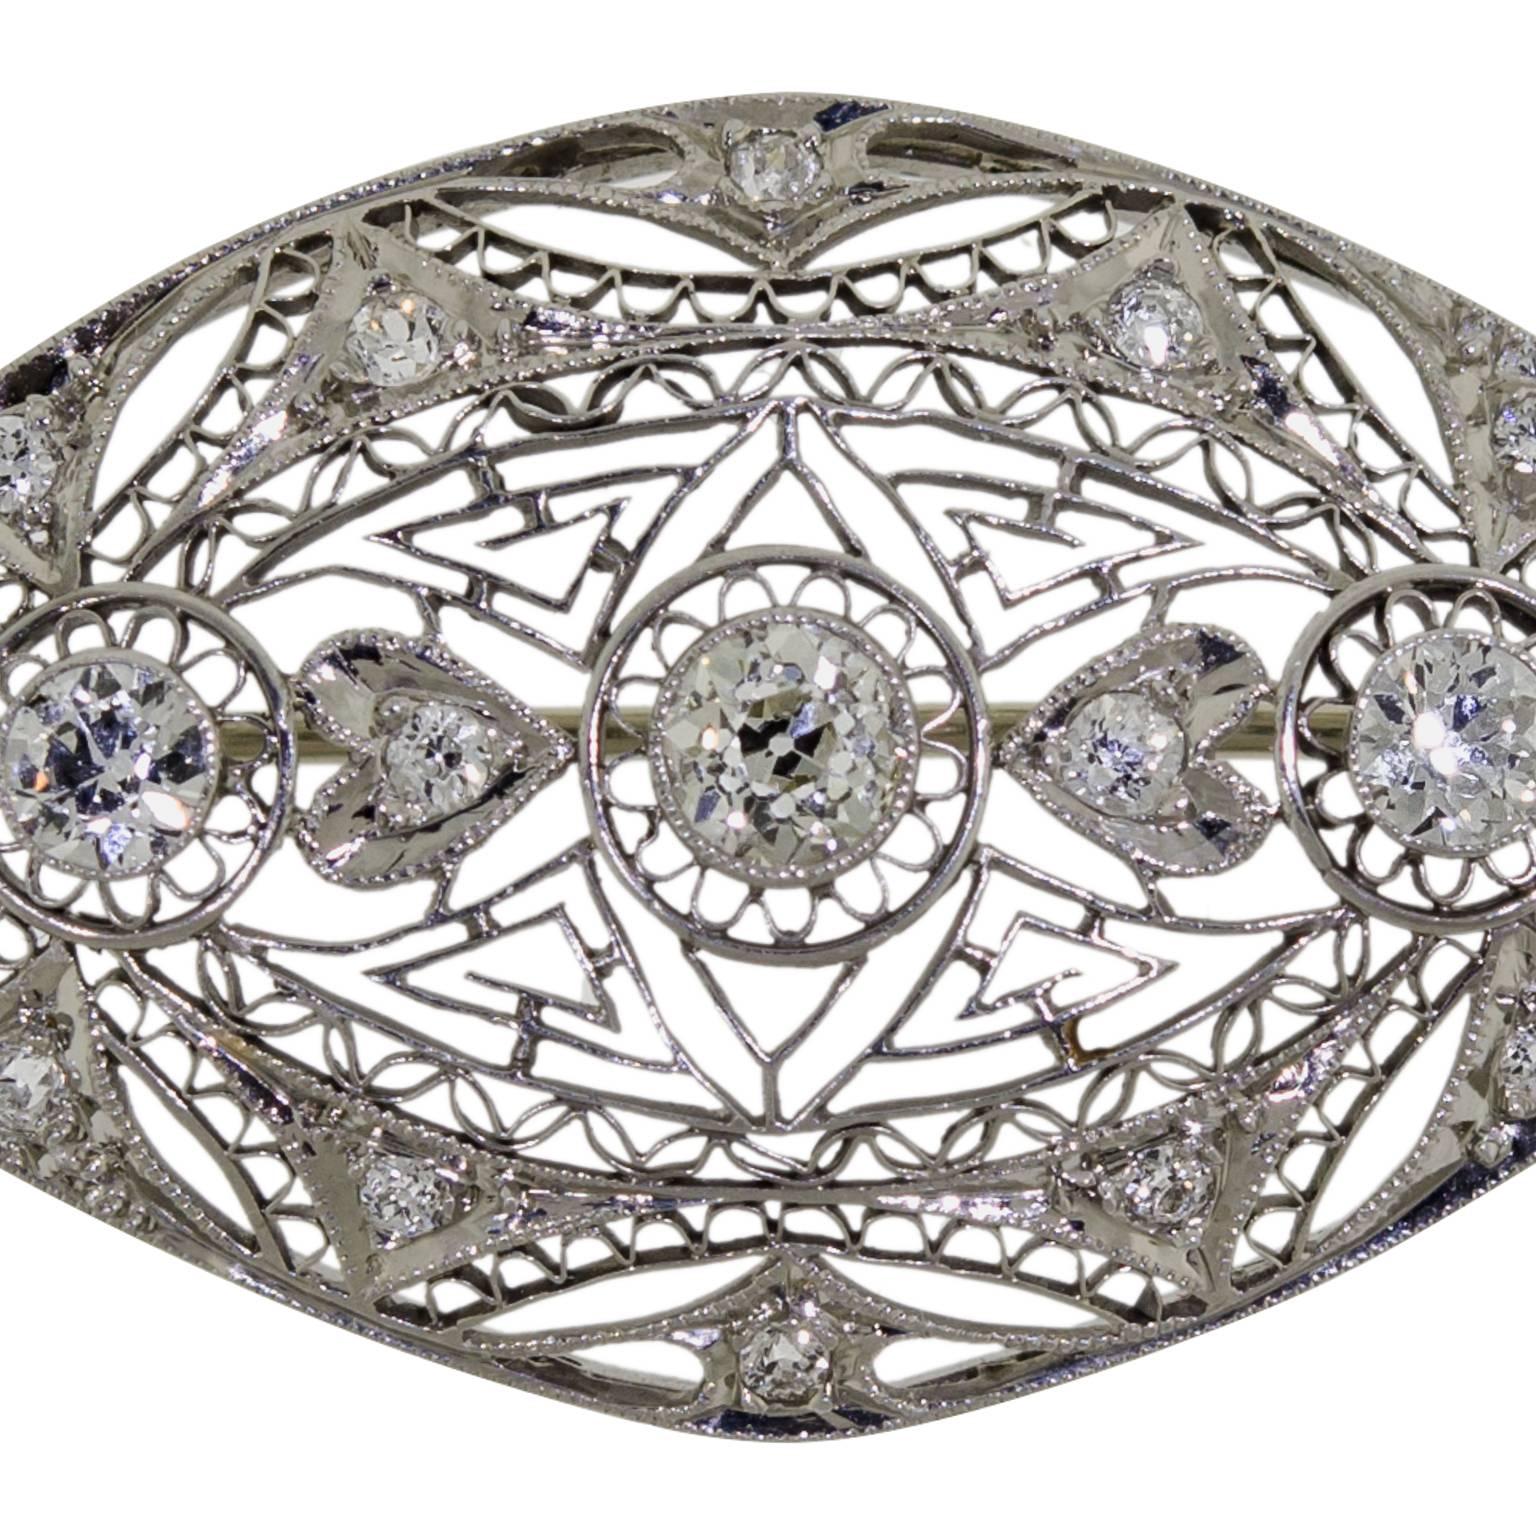 Charming lady's circa 1920 Art Deco 14kt white gold and diamond brooch set with numerous Old European Cut diamonds with a total approximate weight of 1.33 ct. set in a beautiful 14kt white gold filigree and heart motif mount. Lovely lively old cut